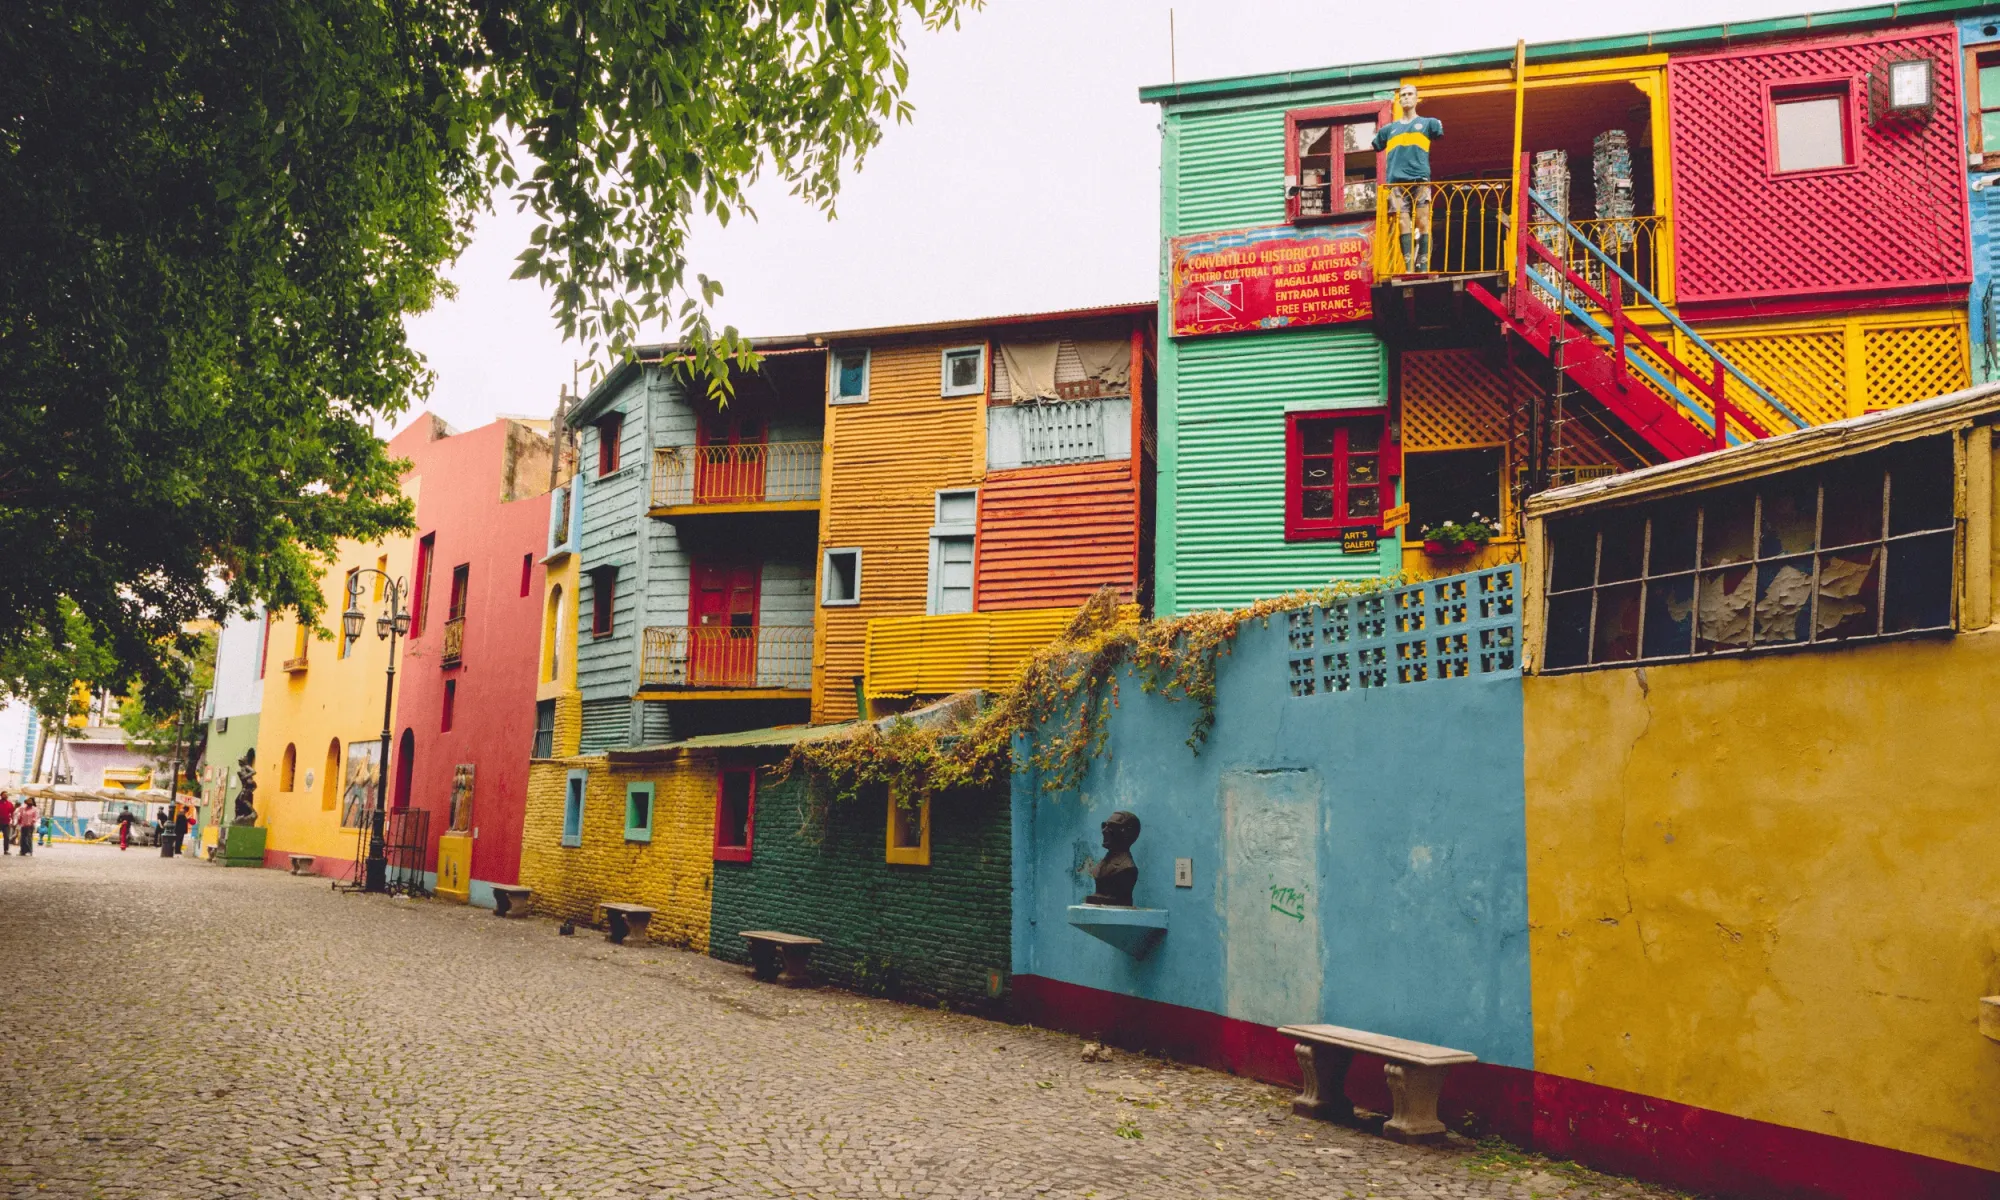 Colorful buildings in Argentina